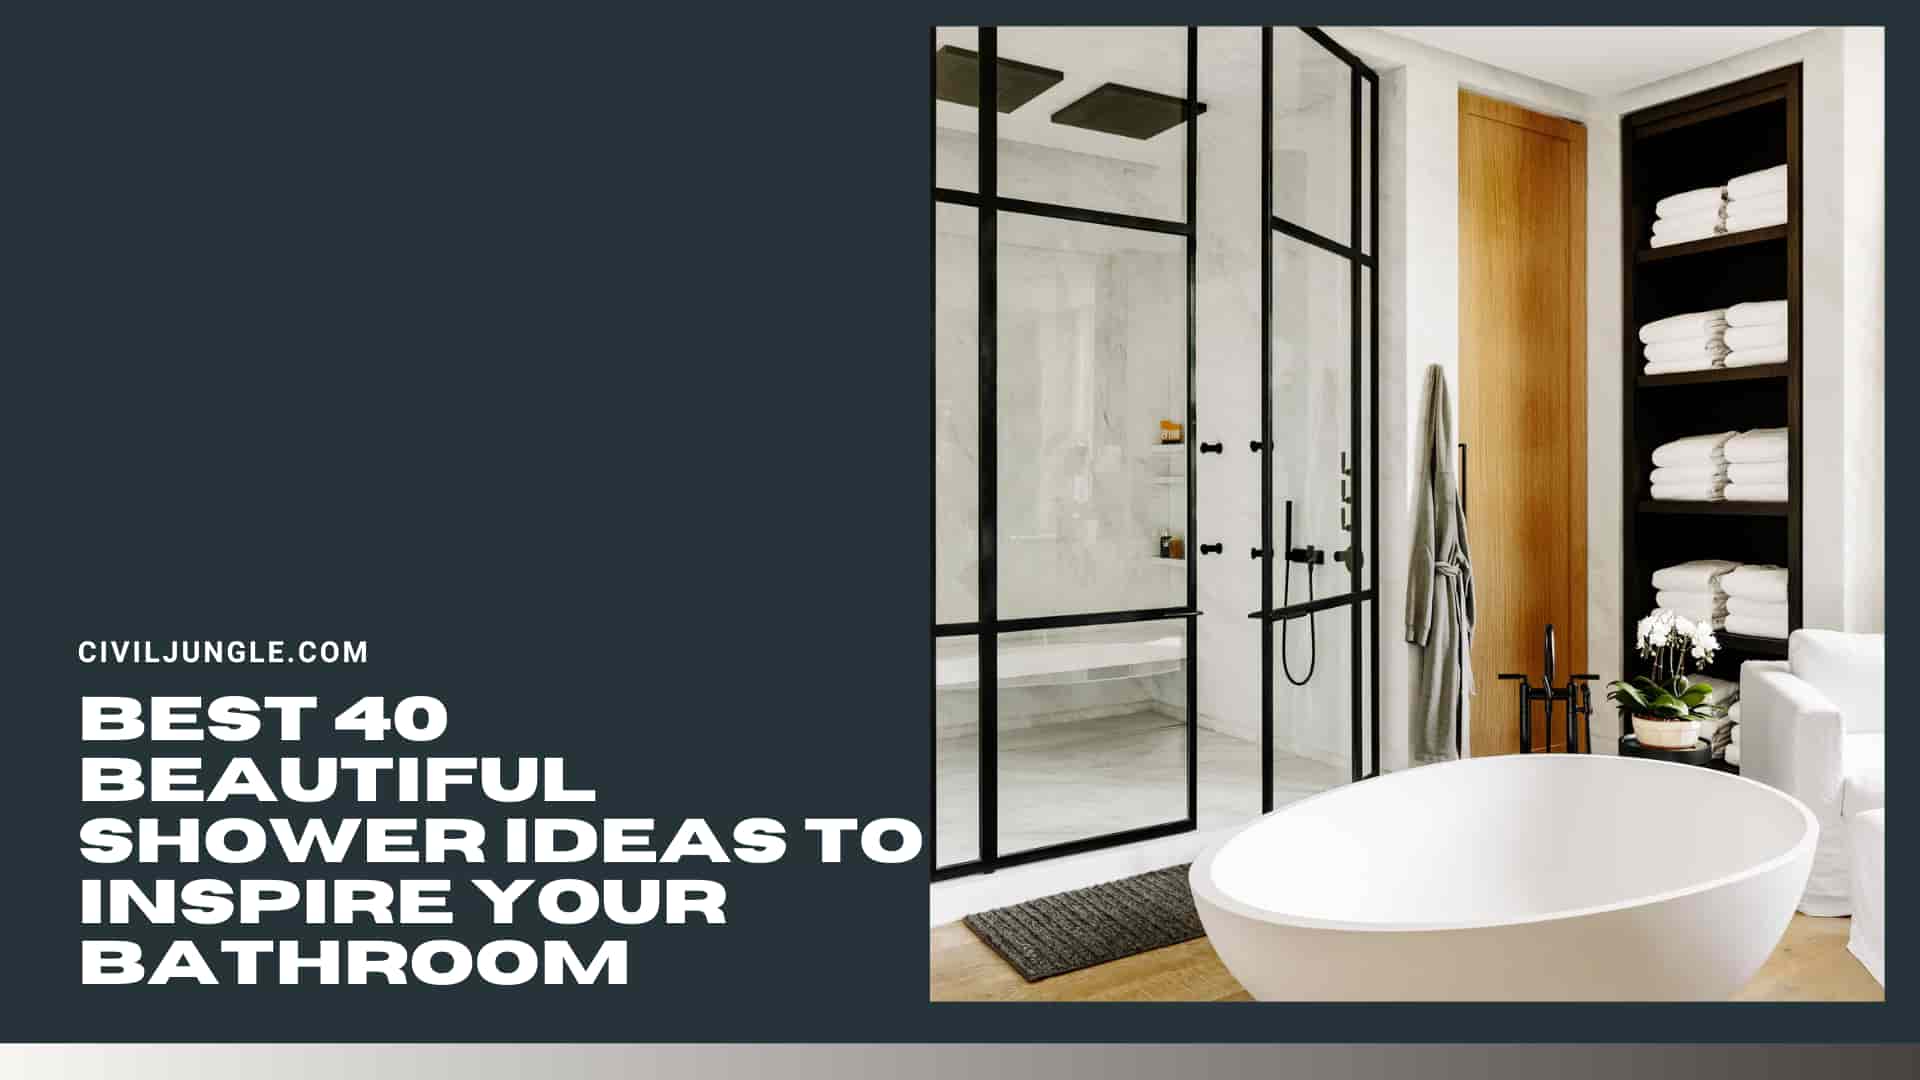 Best 40 Beautiful Shower Ideas to Inspire Your Bathroom